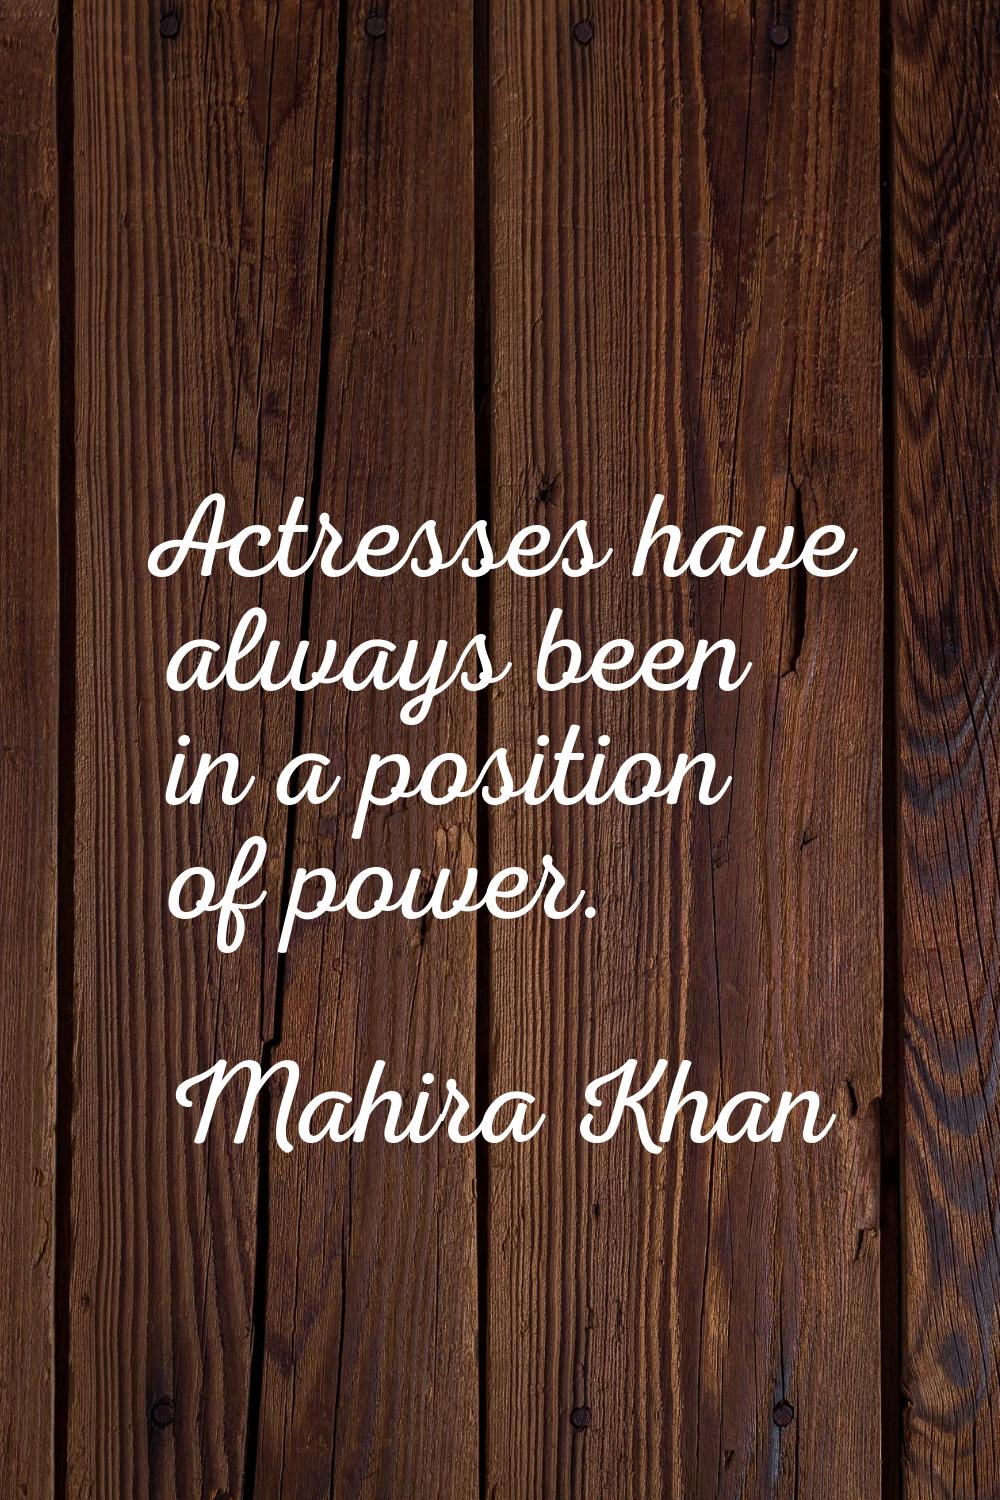 Actresses have always been in a position of power.